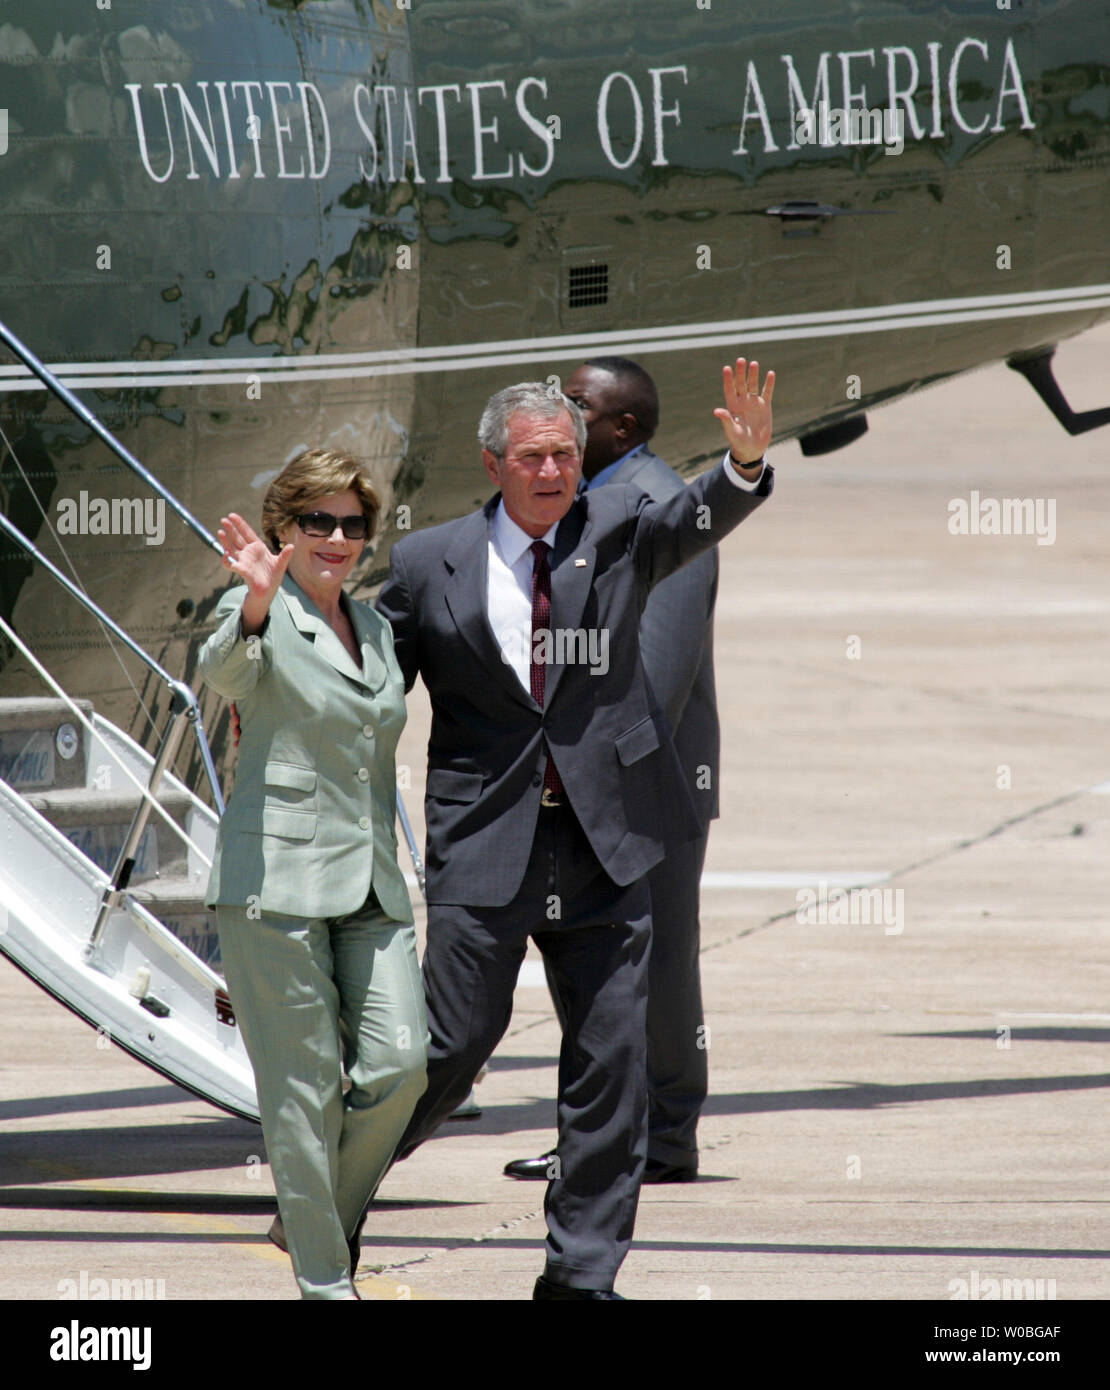 President George W. Bush and First Lady Laura Bush arrive on Marine One and disembark at TSTC airport in Waco, Texas from their ranch in Crawford, Texas June 18, 2006. The President and First Lady spent the Father's Day weekend at his ranch in Crawford, Texas.  (UPI Photo/Ron Russek II) Stock Photo